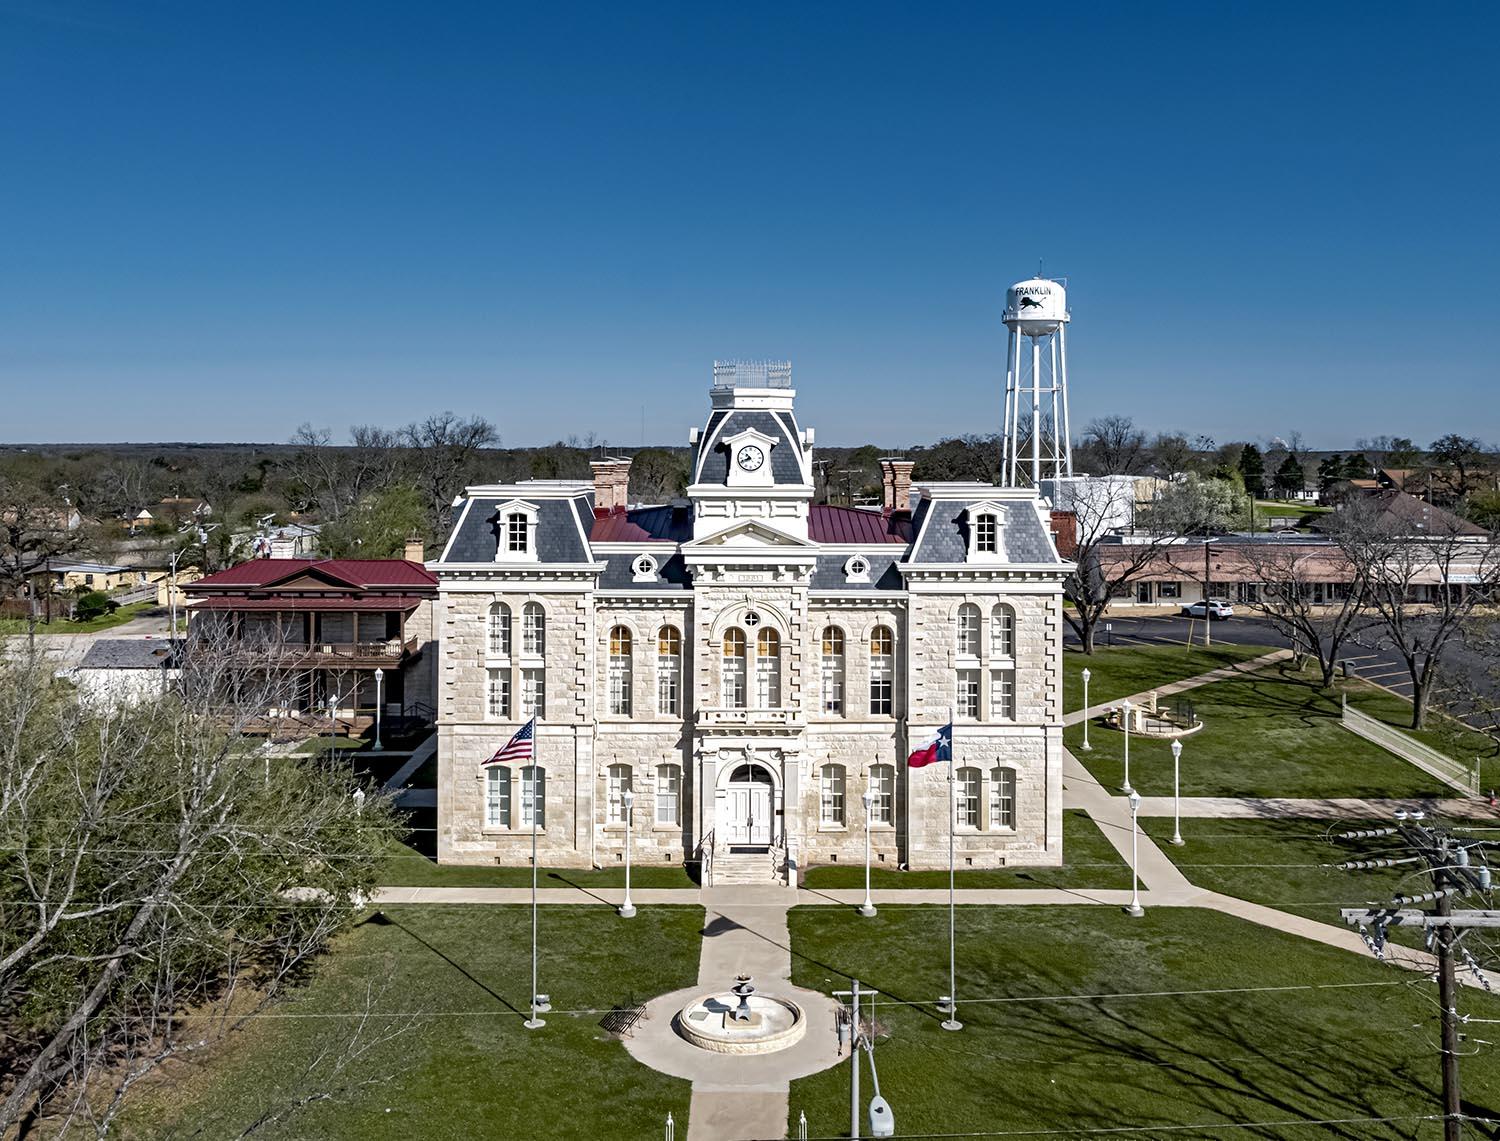 Robertson County Courthouse - 1881
Franklin, Texas